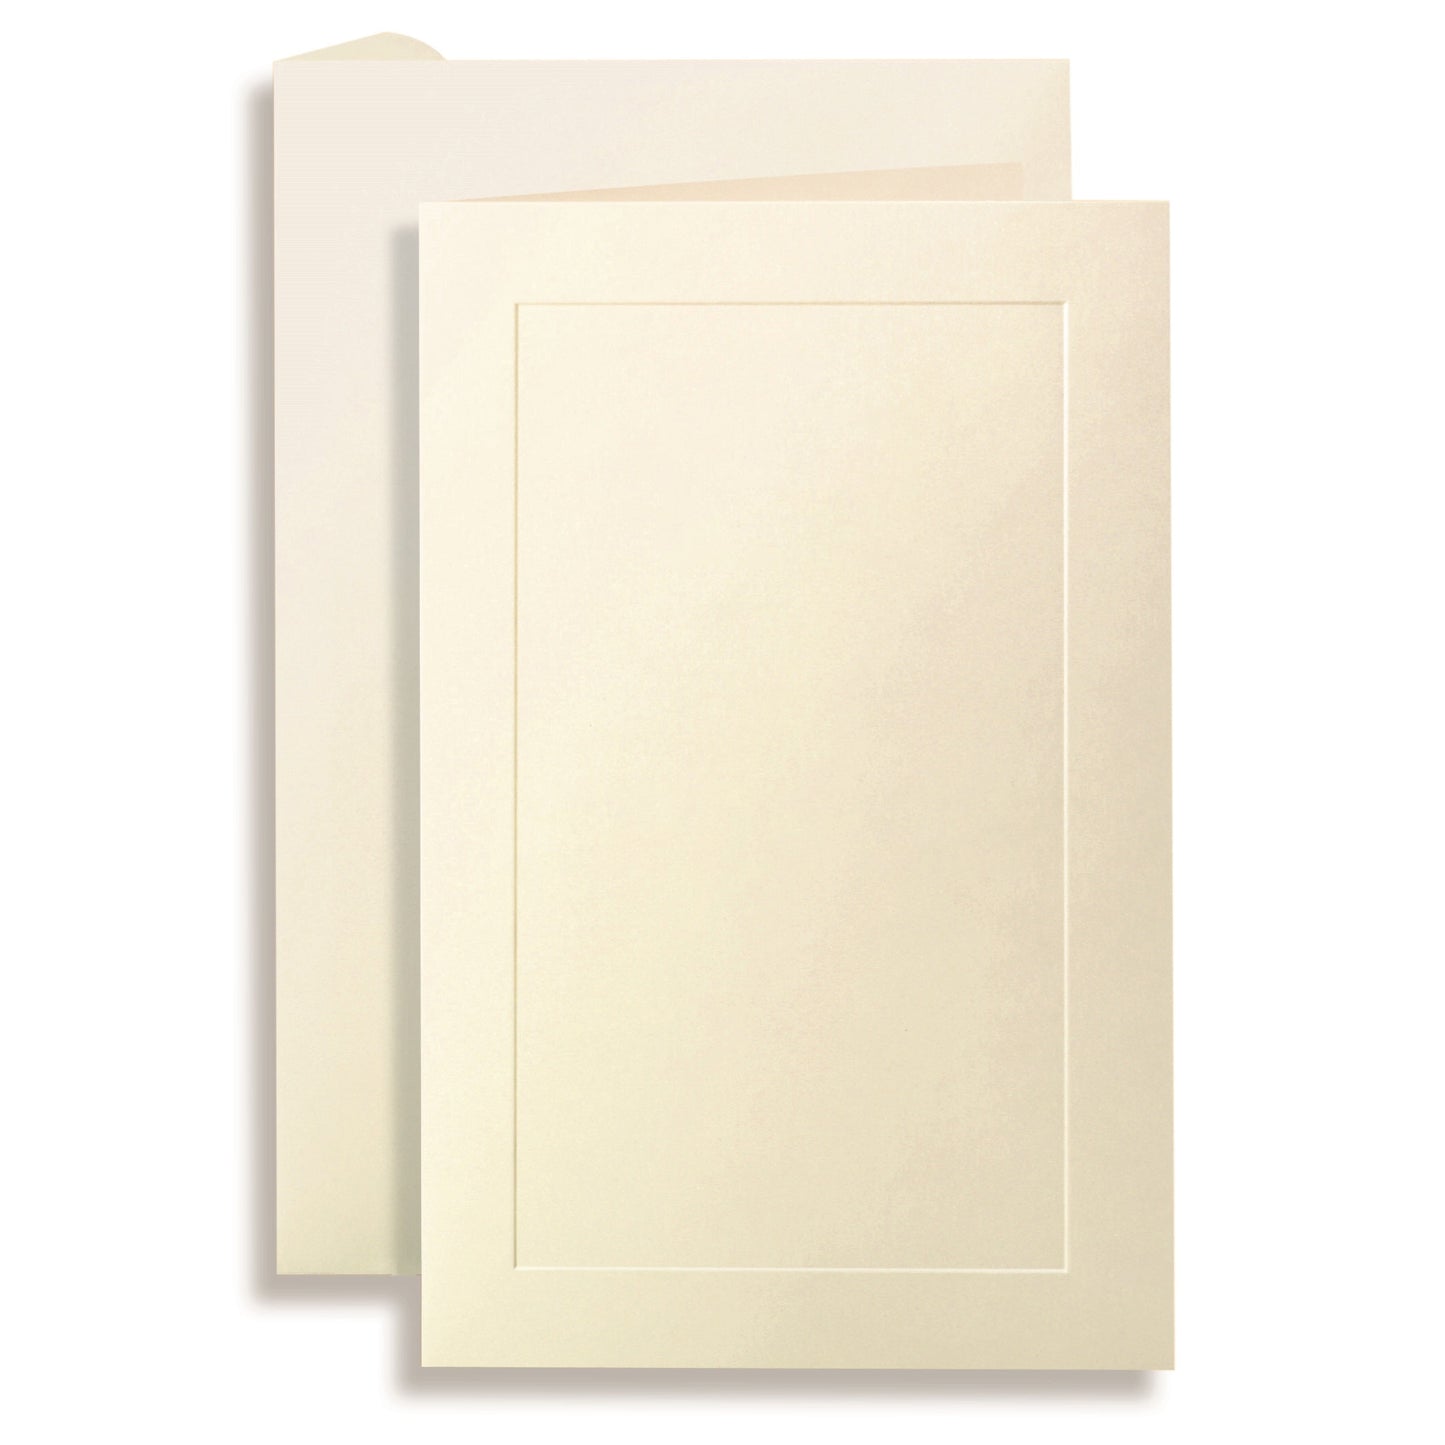 St. James® Overtures® Traditional Embossed Invitation Cards, Ivory, 40 sets, 71041